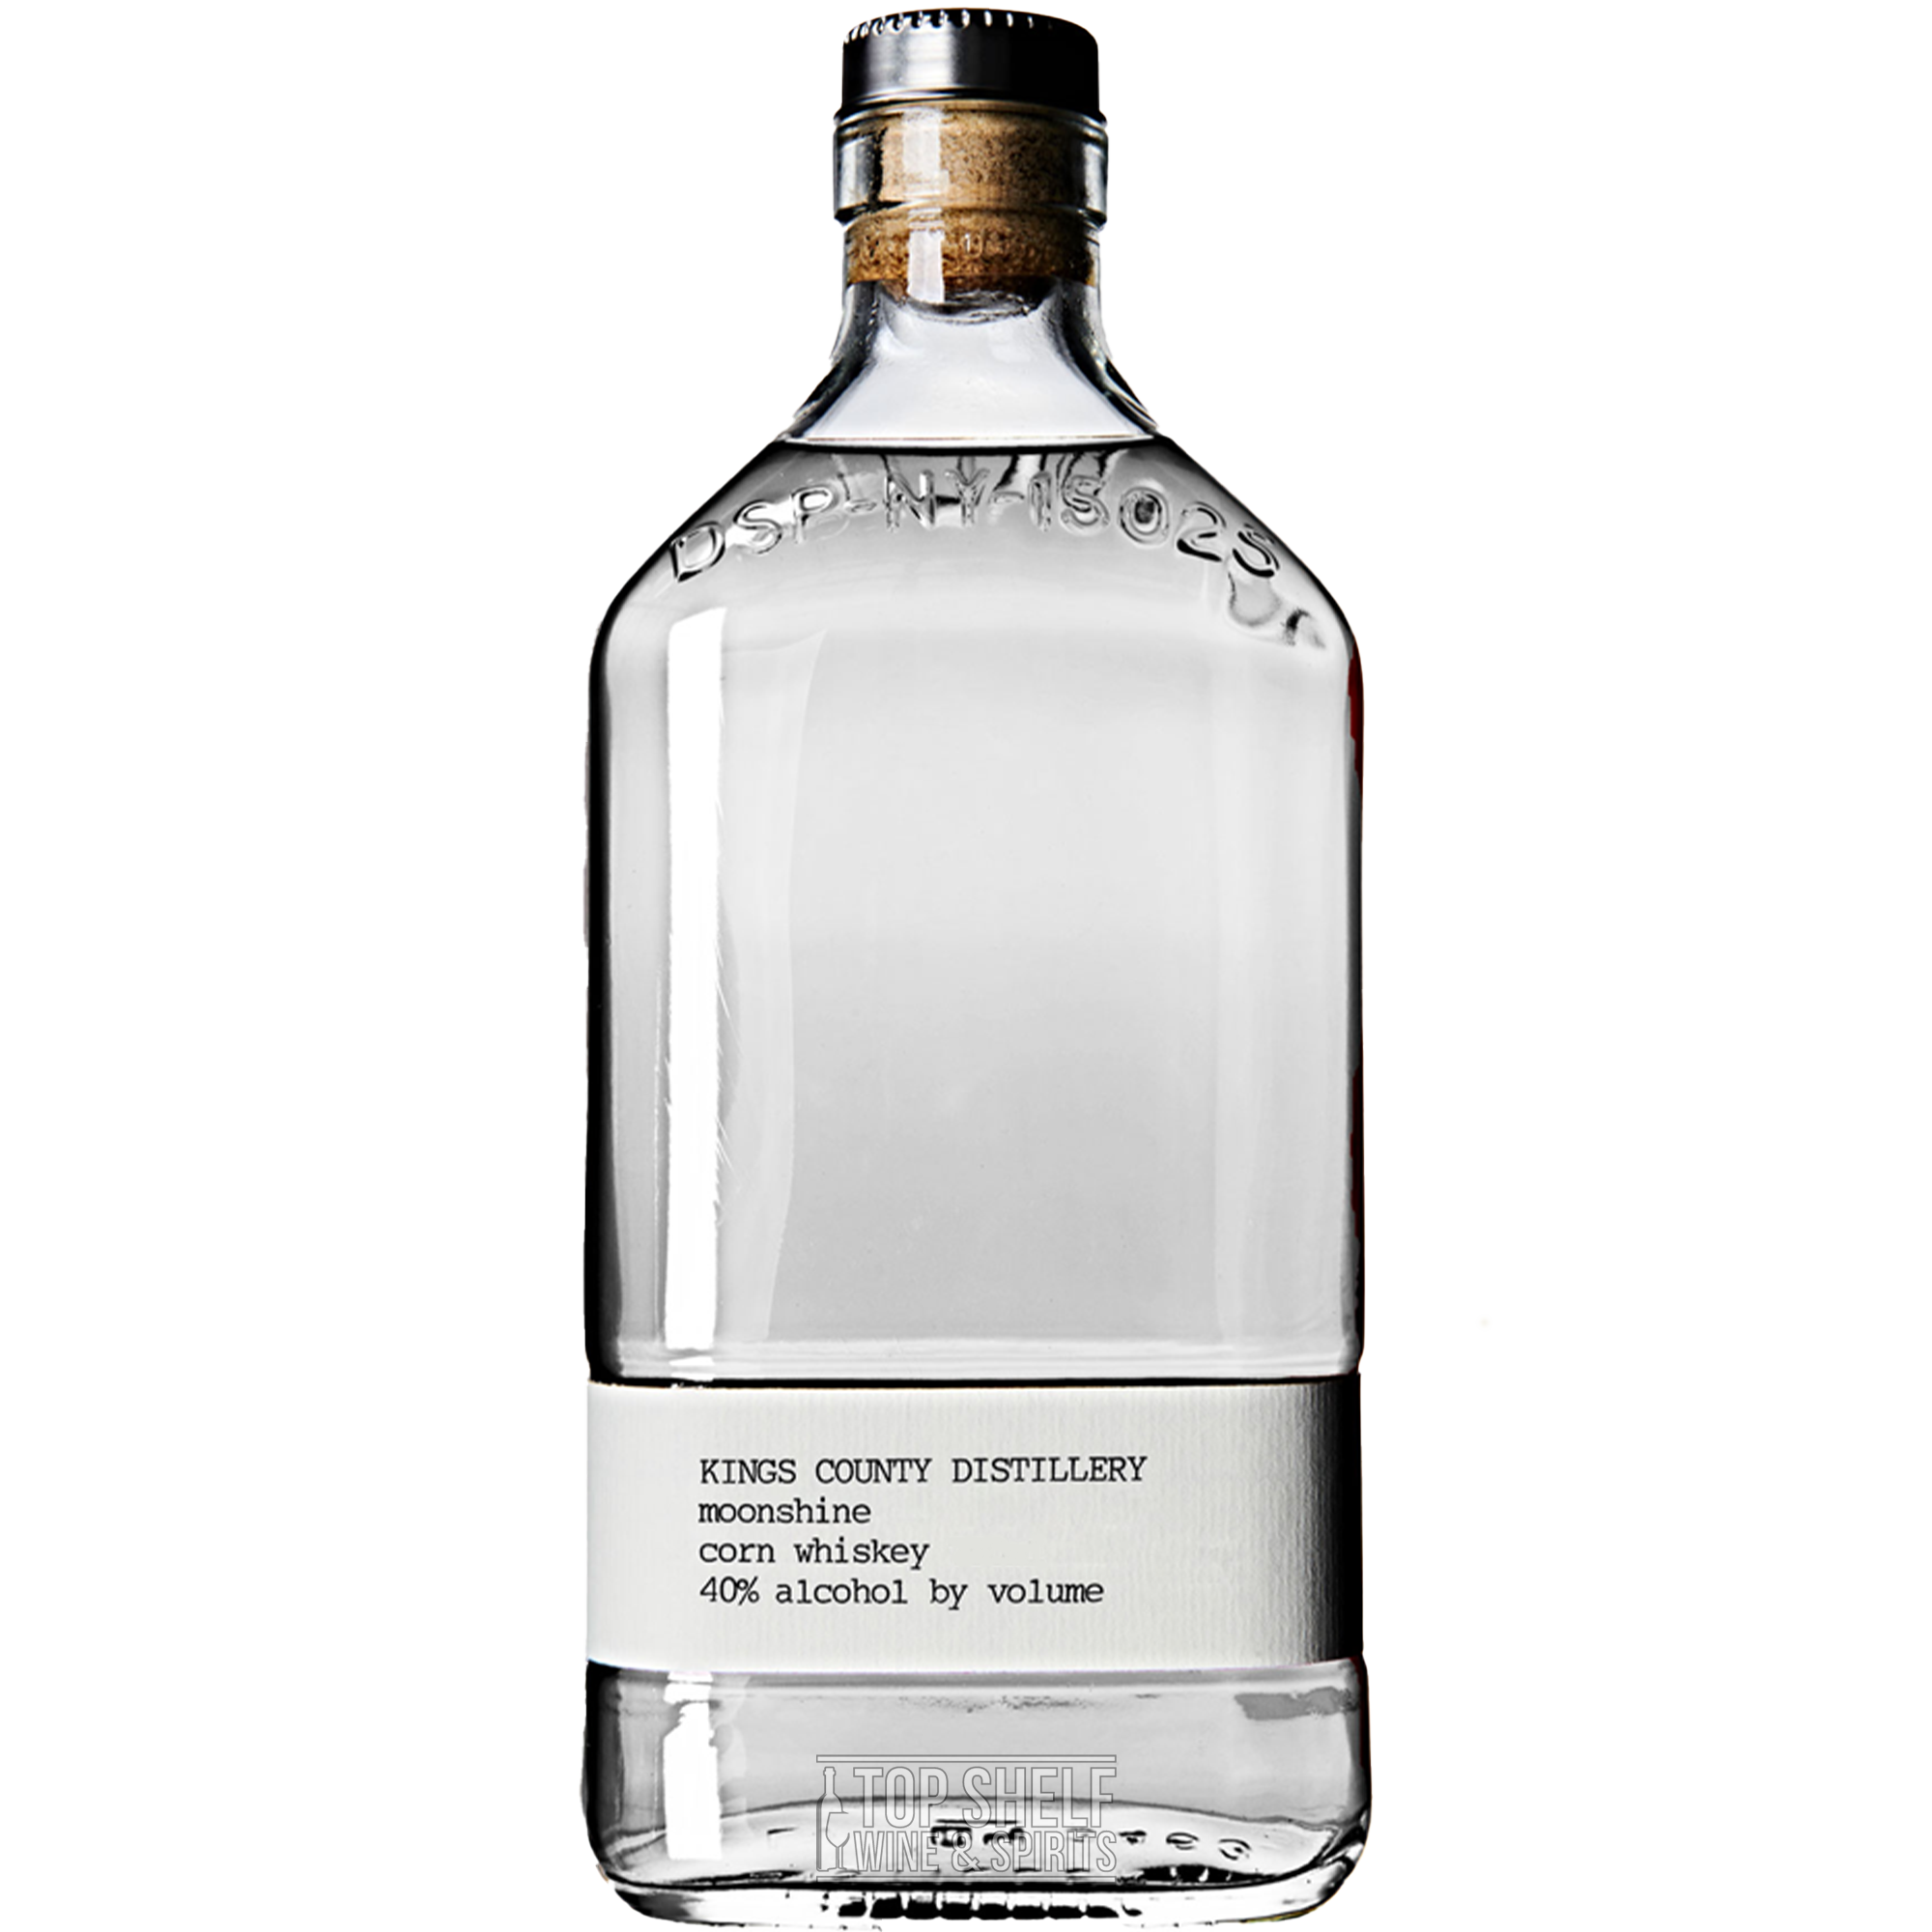 King's Country Distillery Moonshine Corn Whiskey